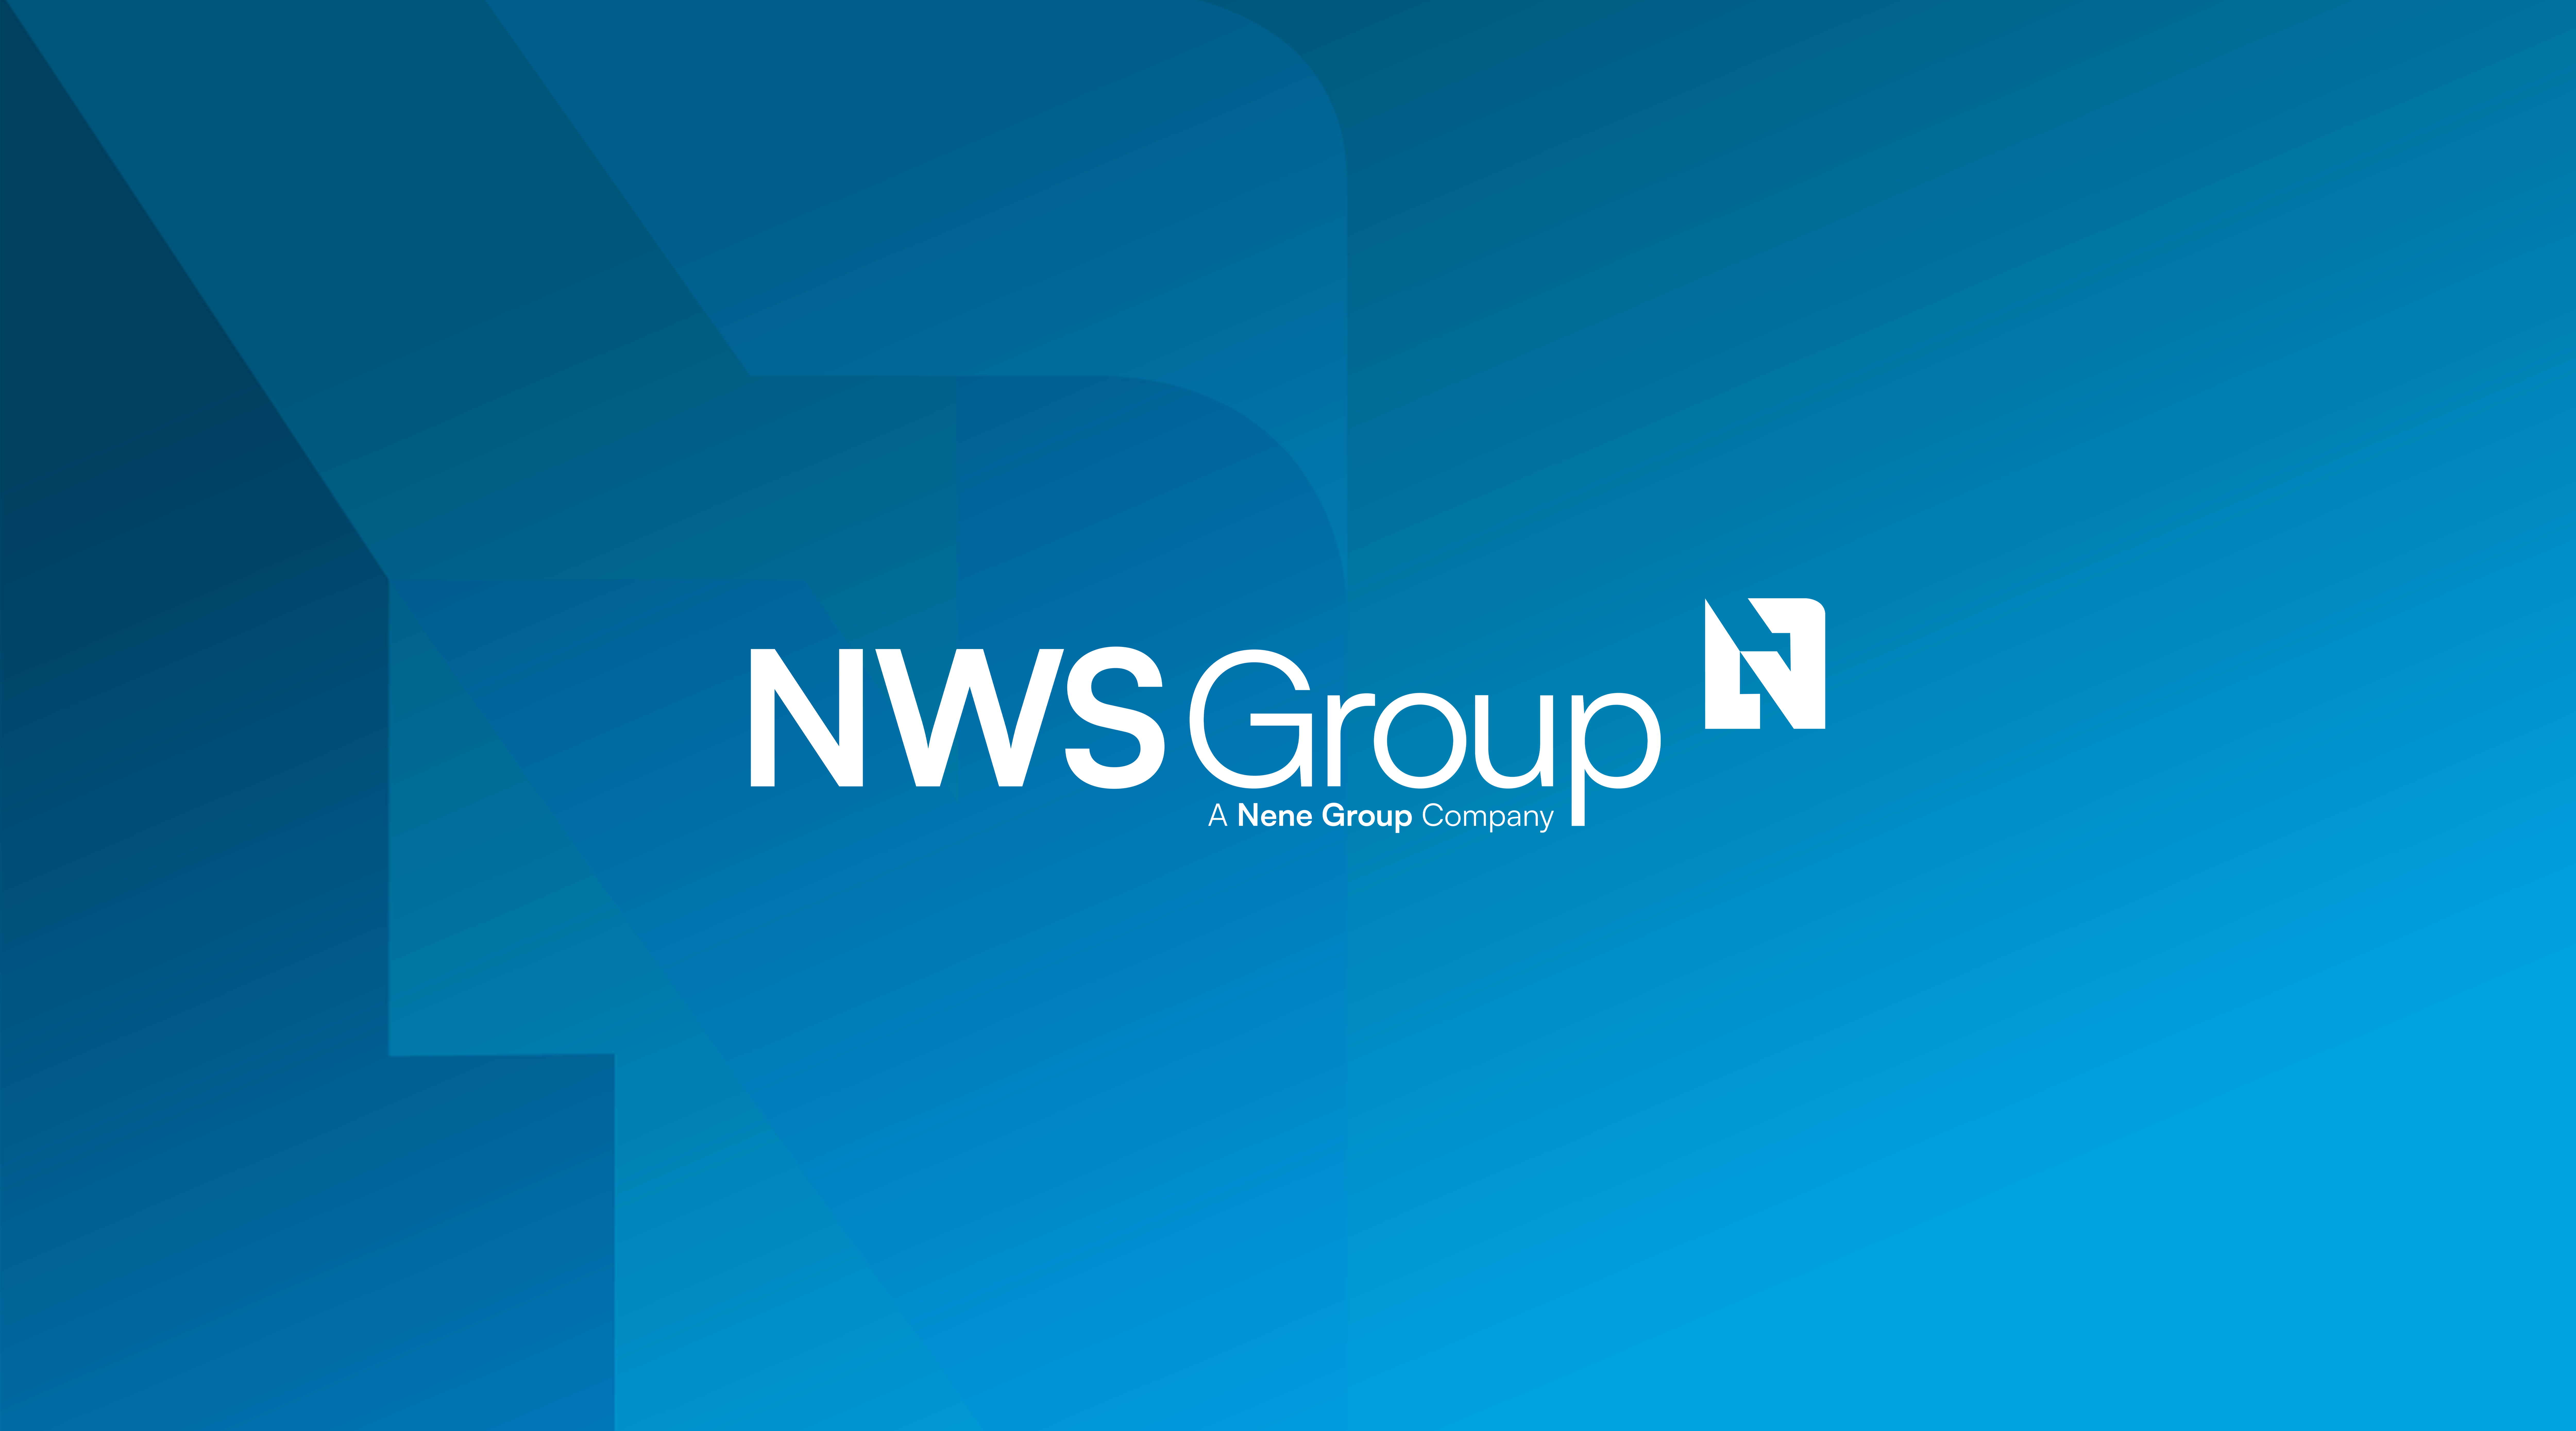 NWS Group Announcement